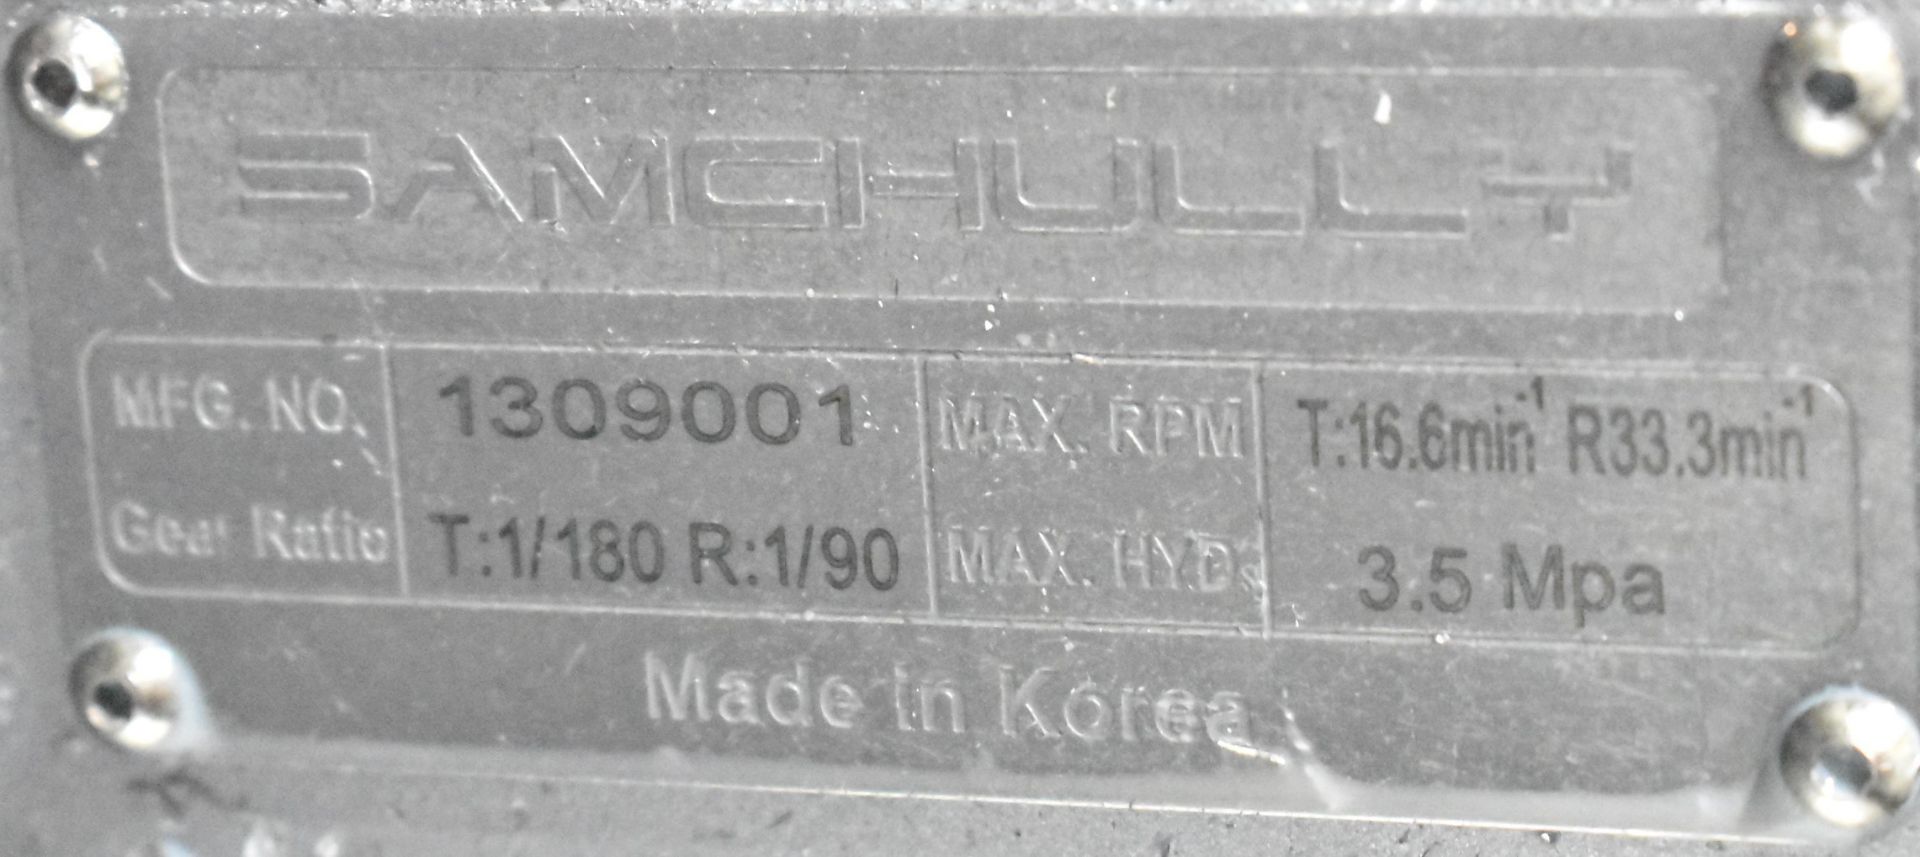 SAMCHULLY TR-250FF 4TH AND 5TH AXIS WITH TRAVELS: A-180 DEG IN 0.01 DEG INCREMENTS, B-90 DEG IN 0.01 - Image 3 of 6